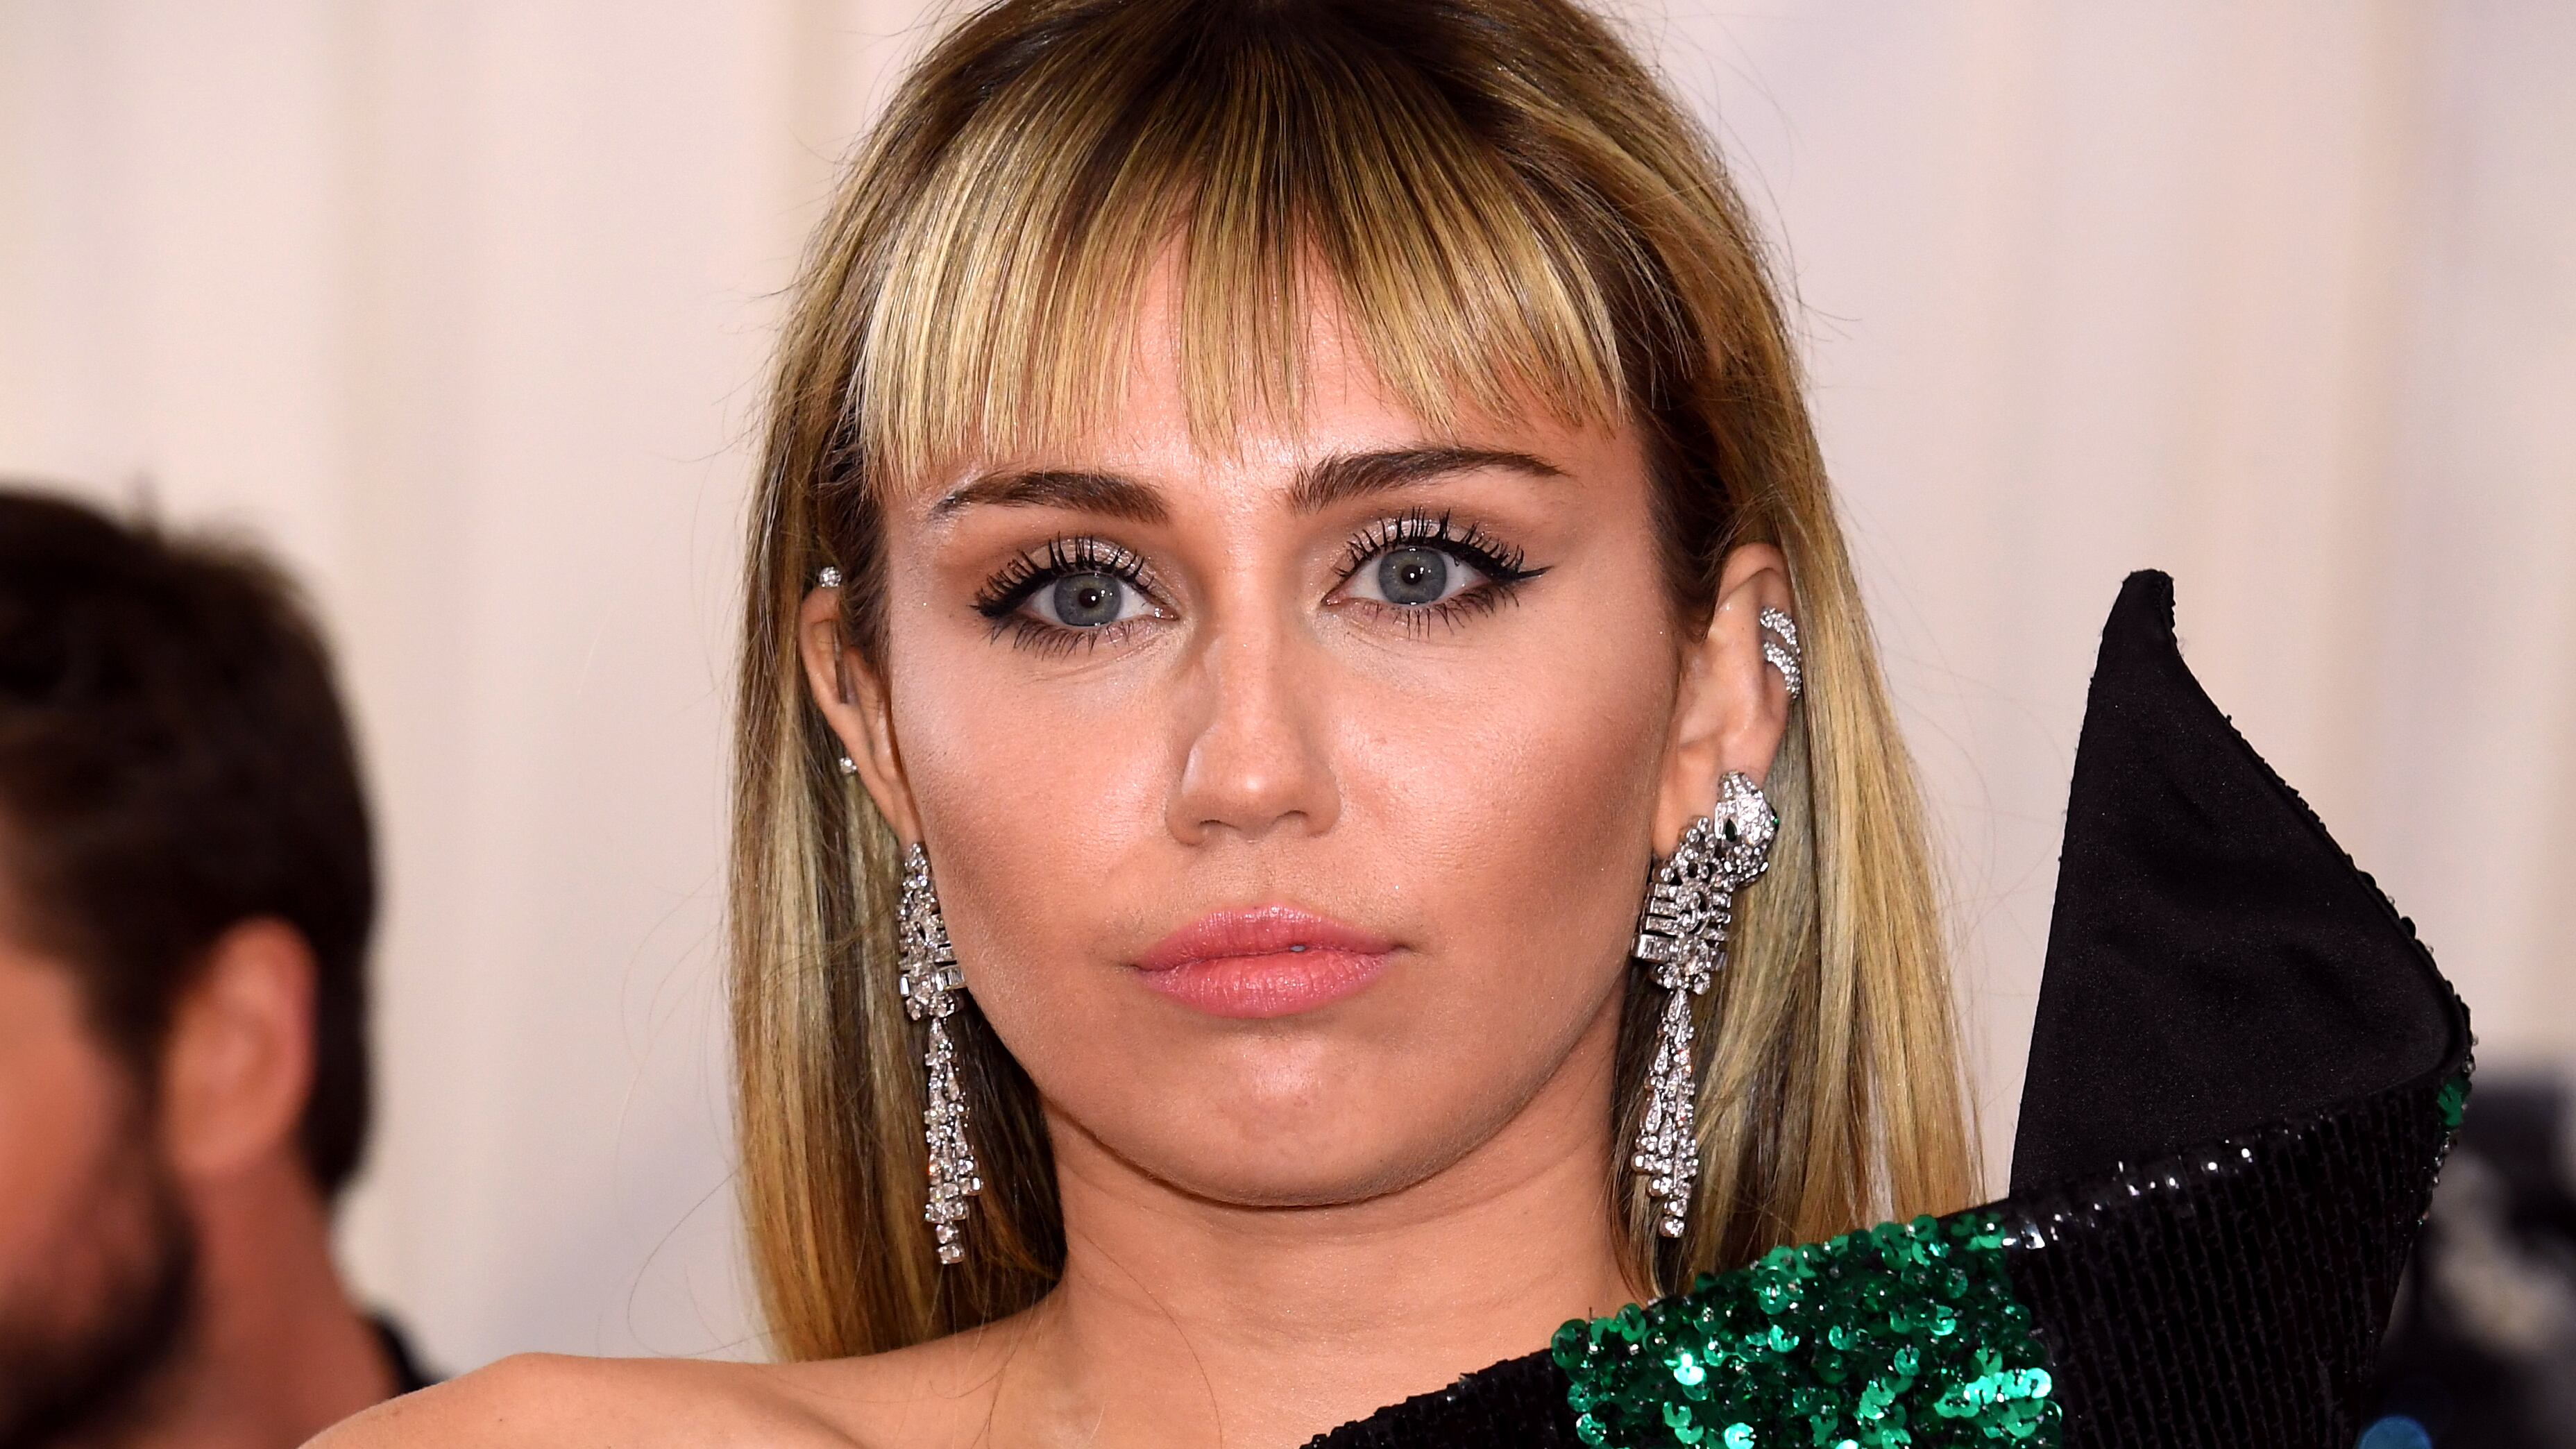 Miley Cyrus has opened up about her friendship with Beyonce